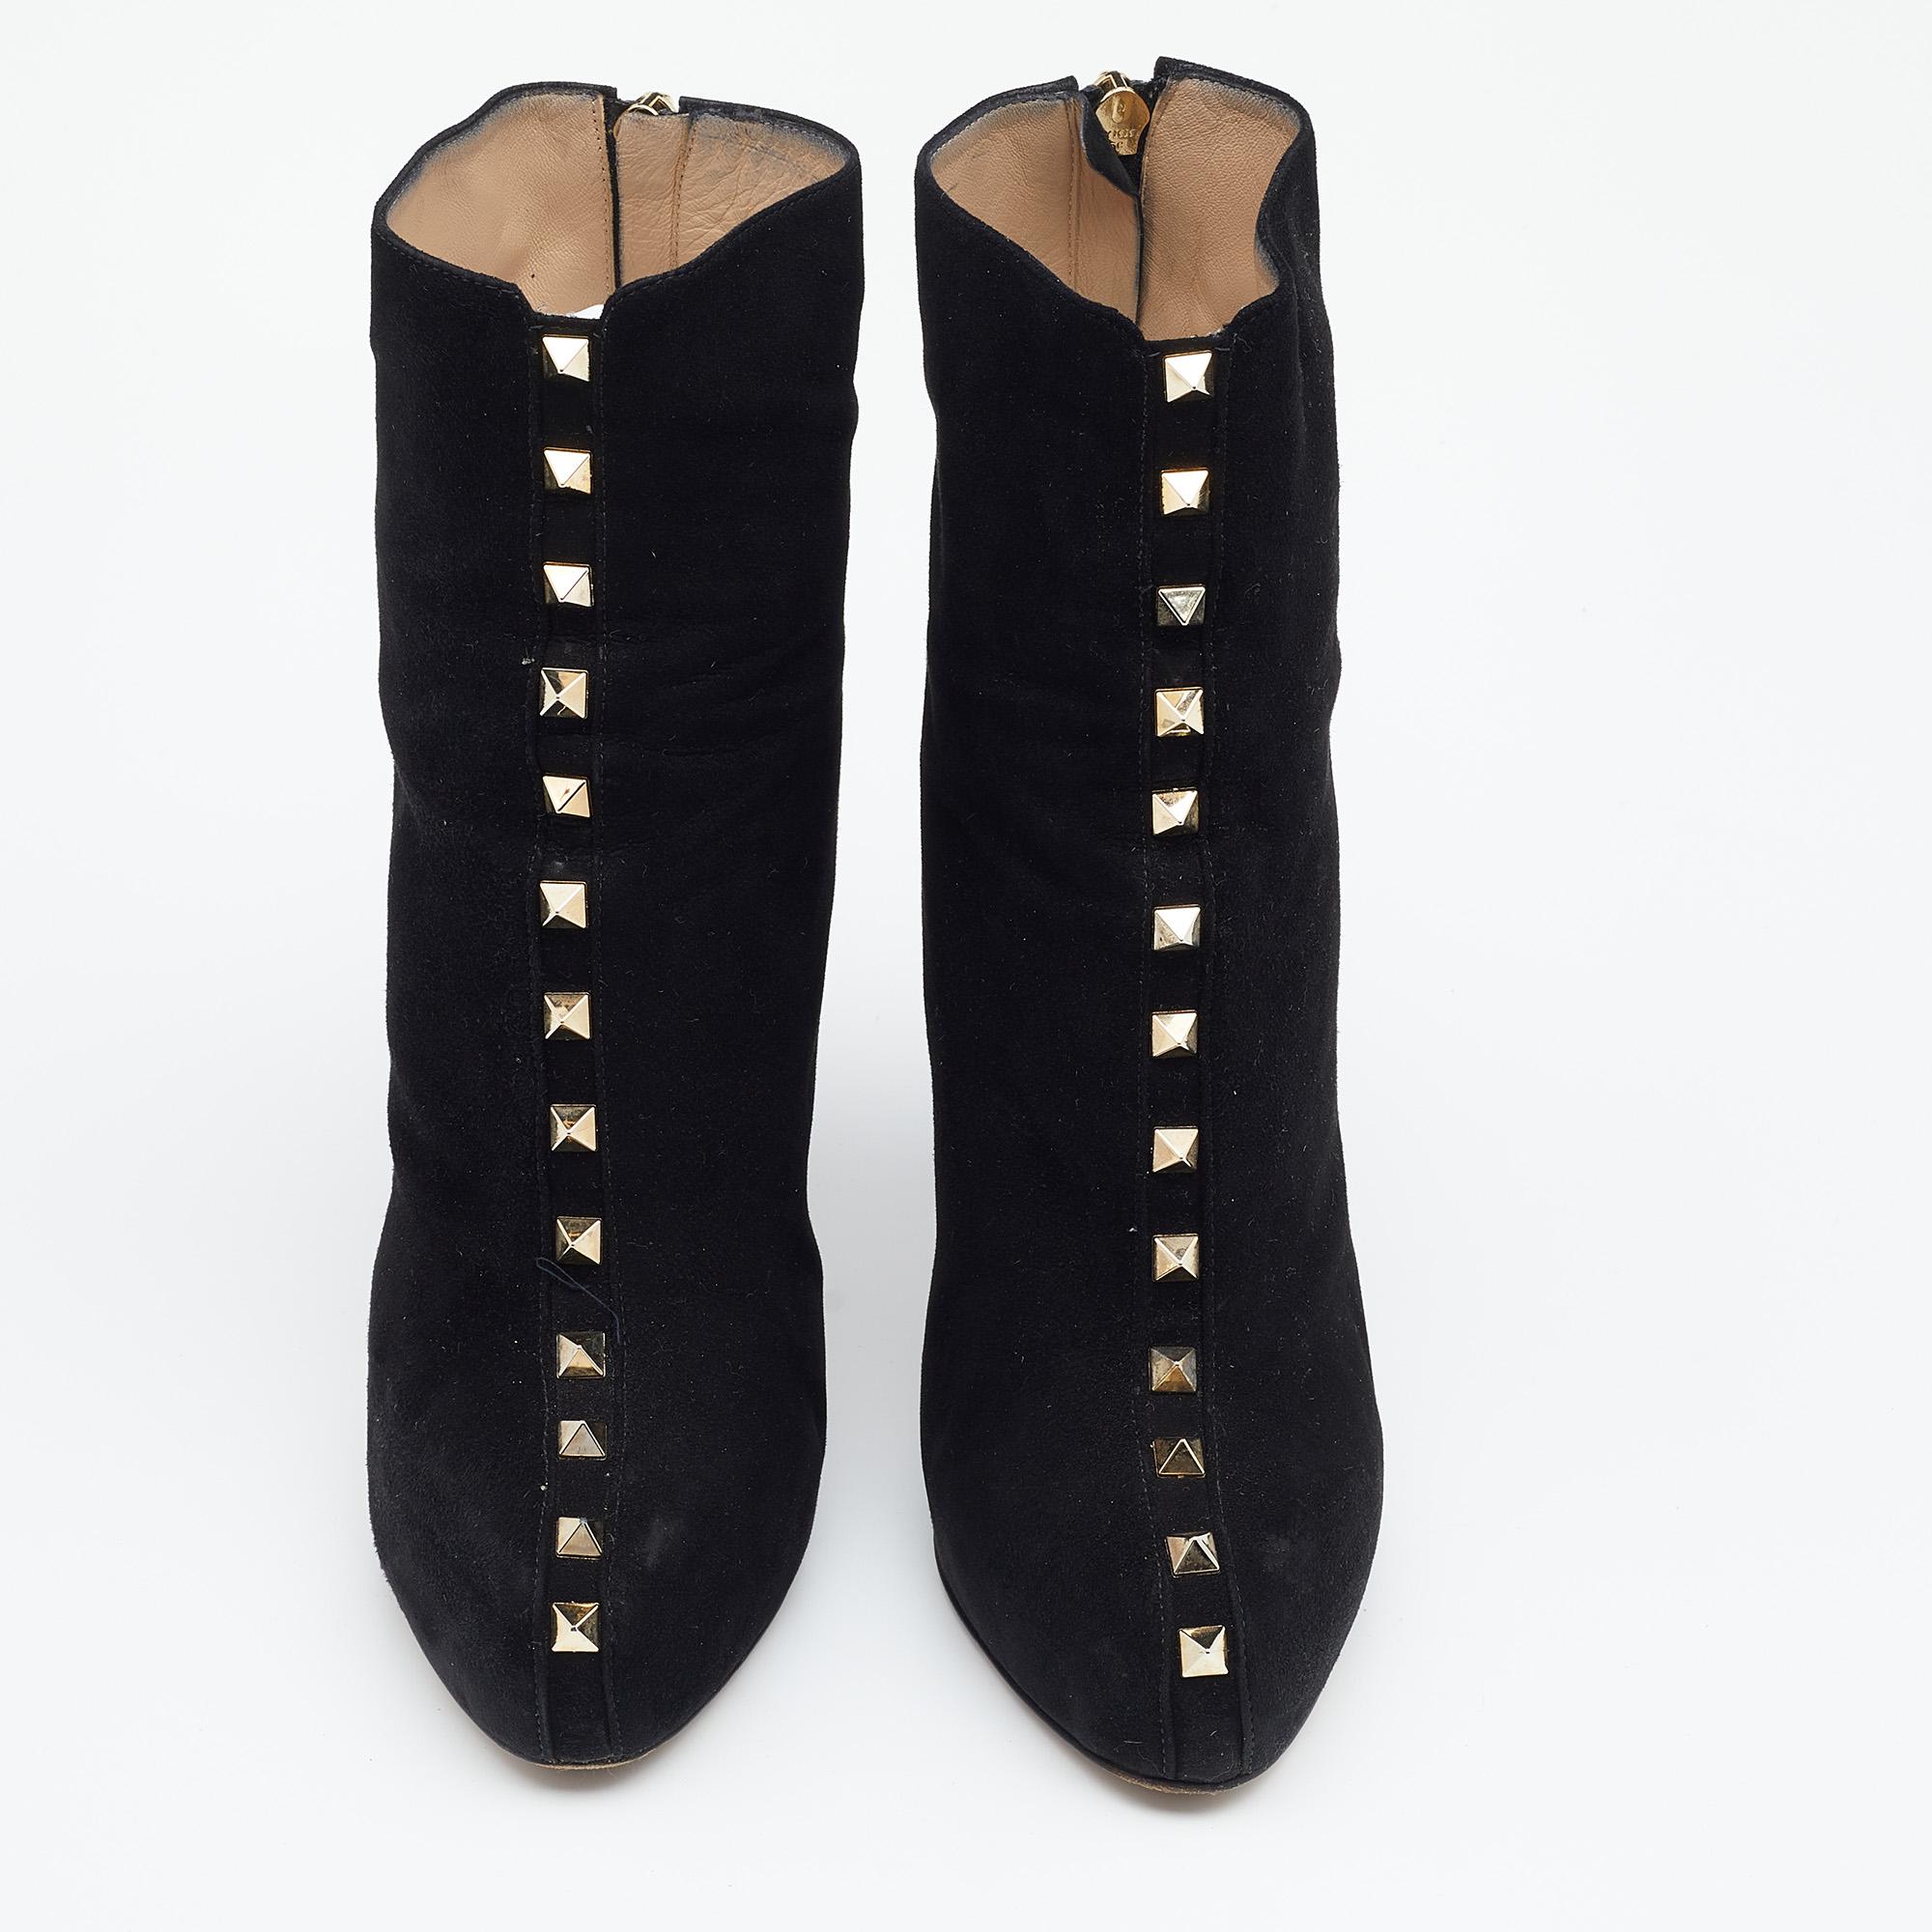 Valentino Black Suede Rockstud Ankle Length Boots Size 38 1